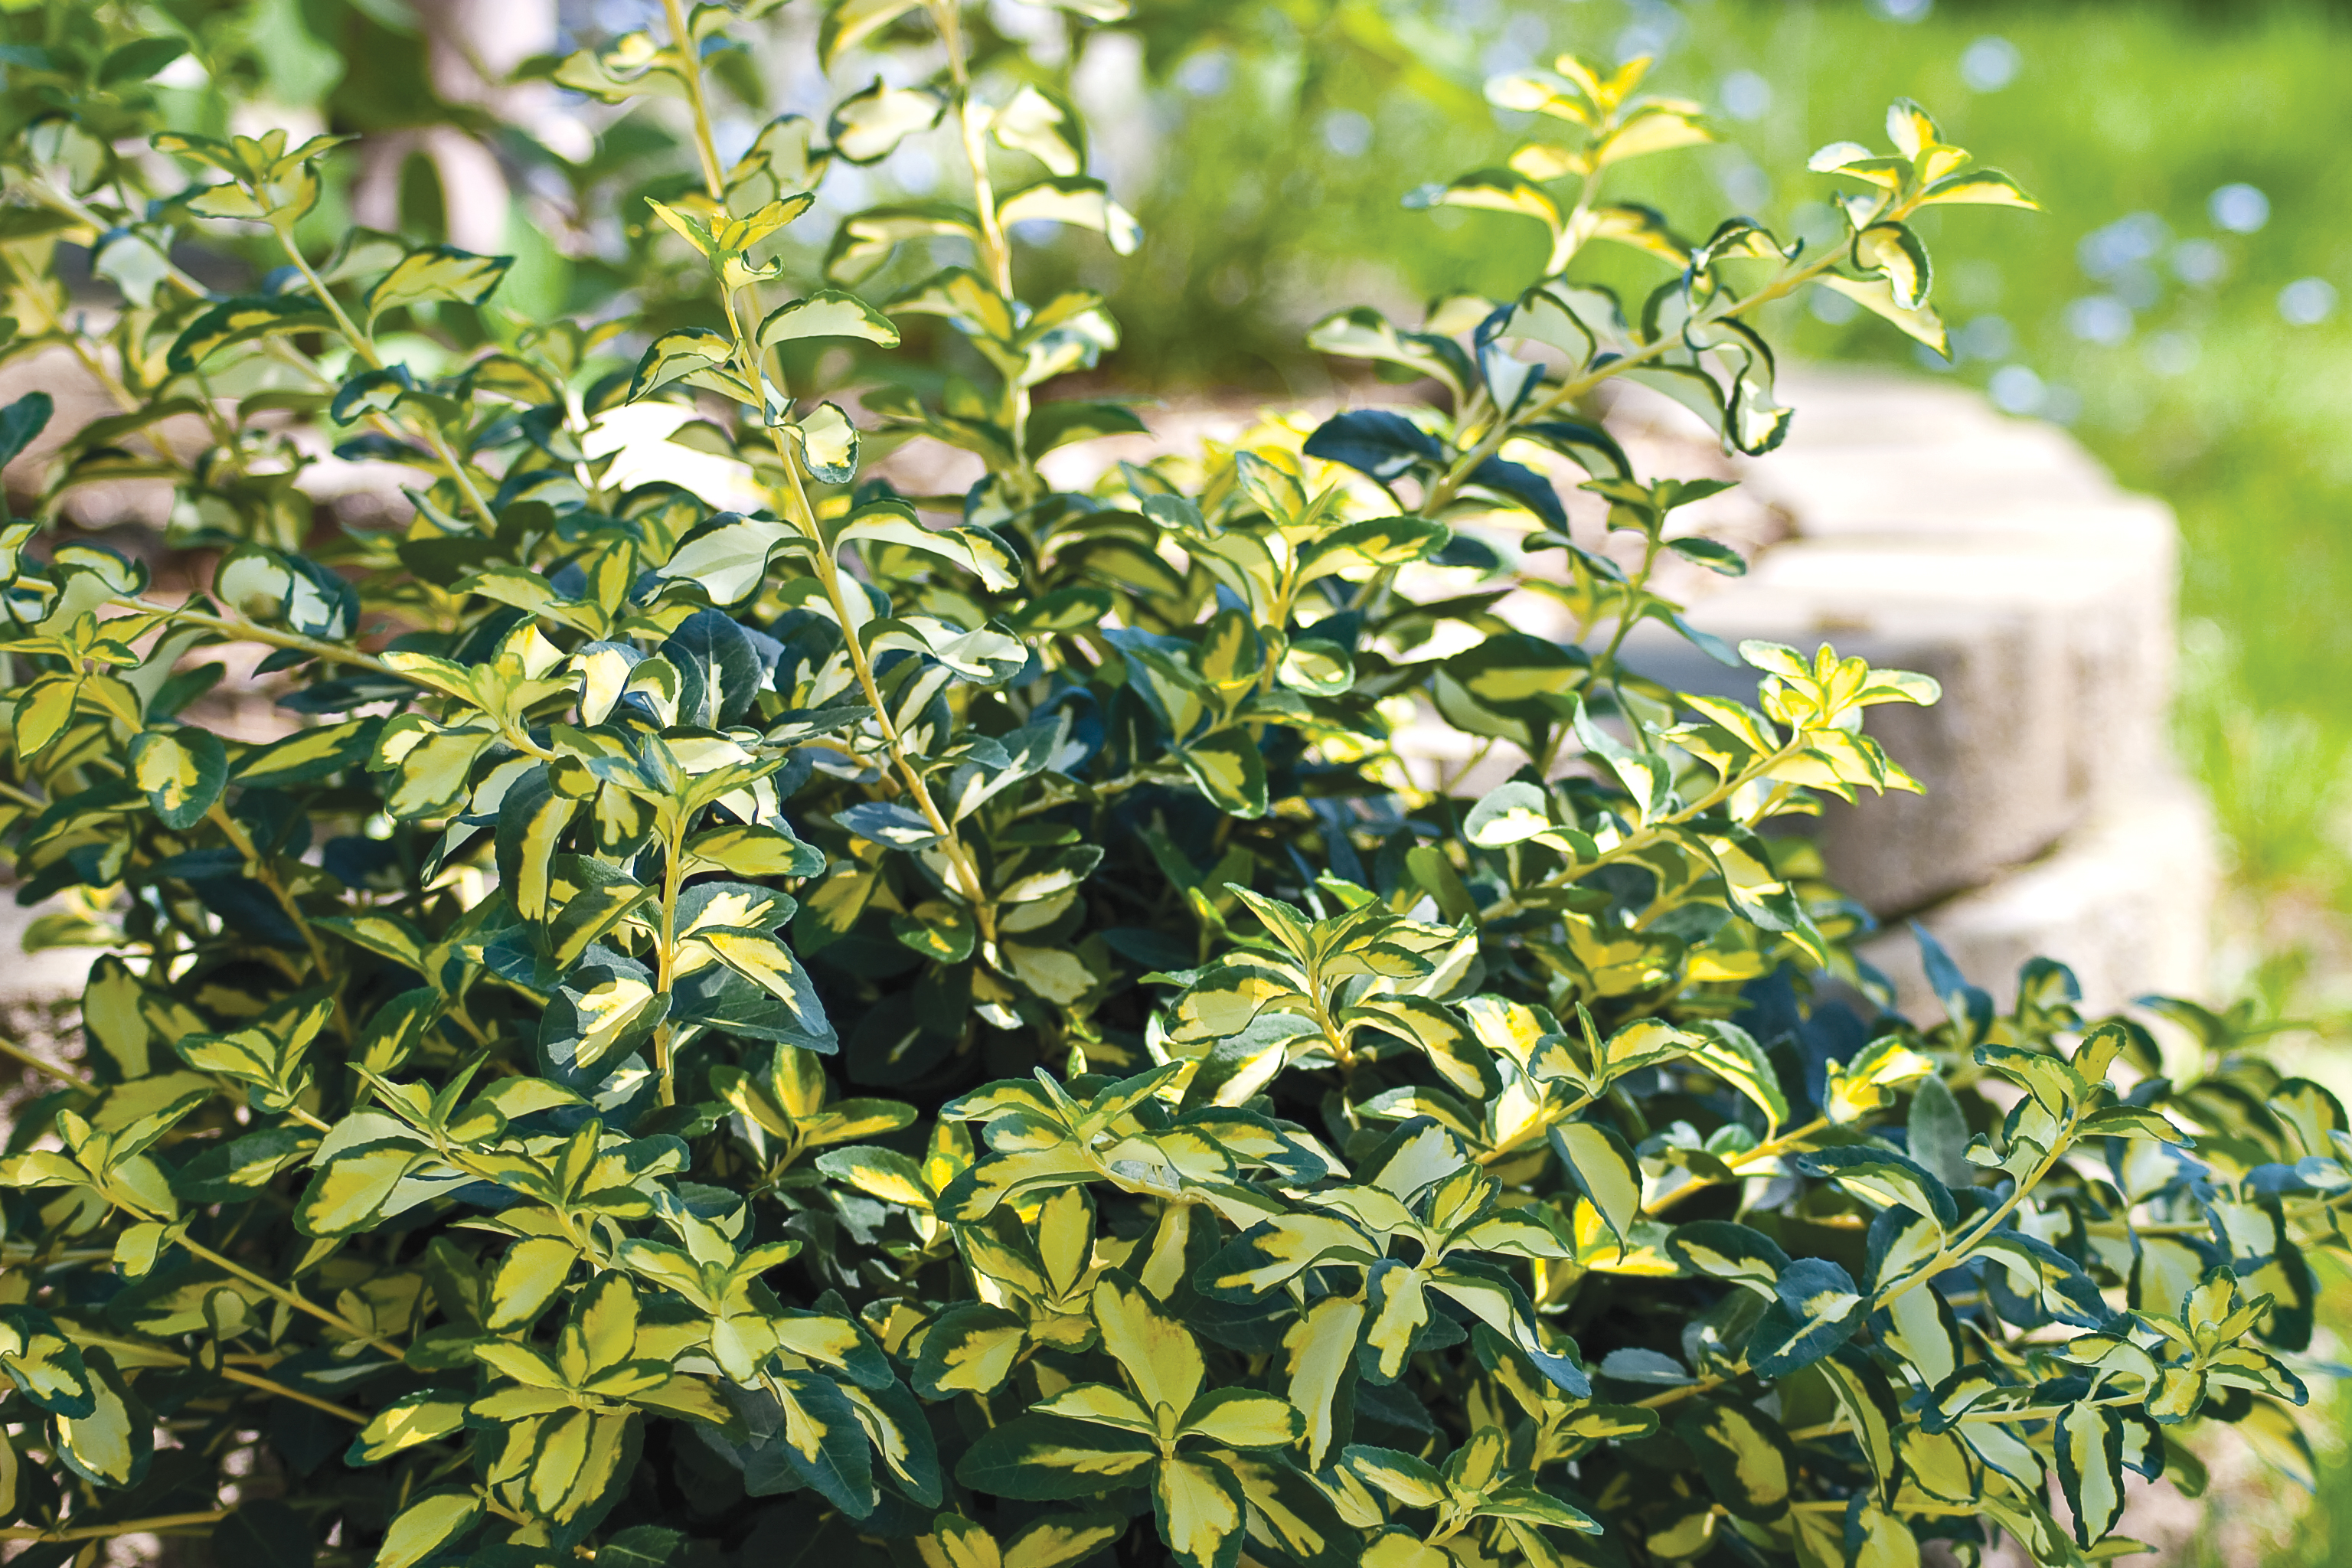 Close up of the yellow and green variegated Blondy Euonymus foliage